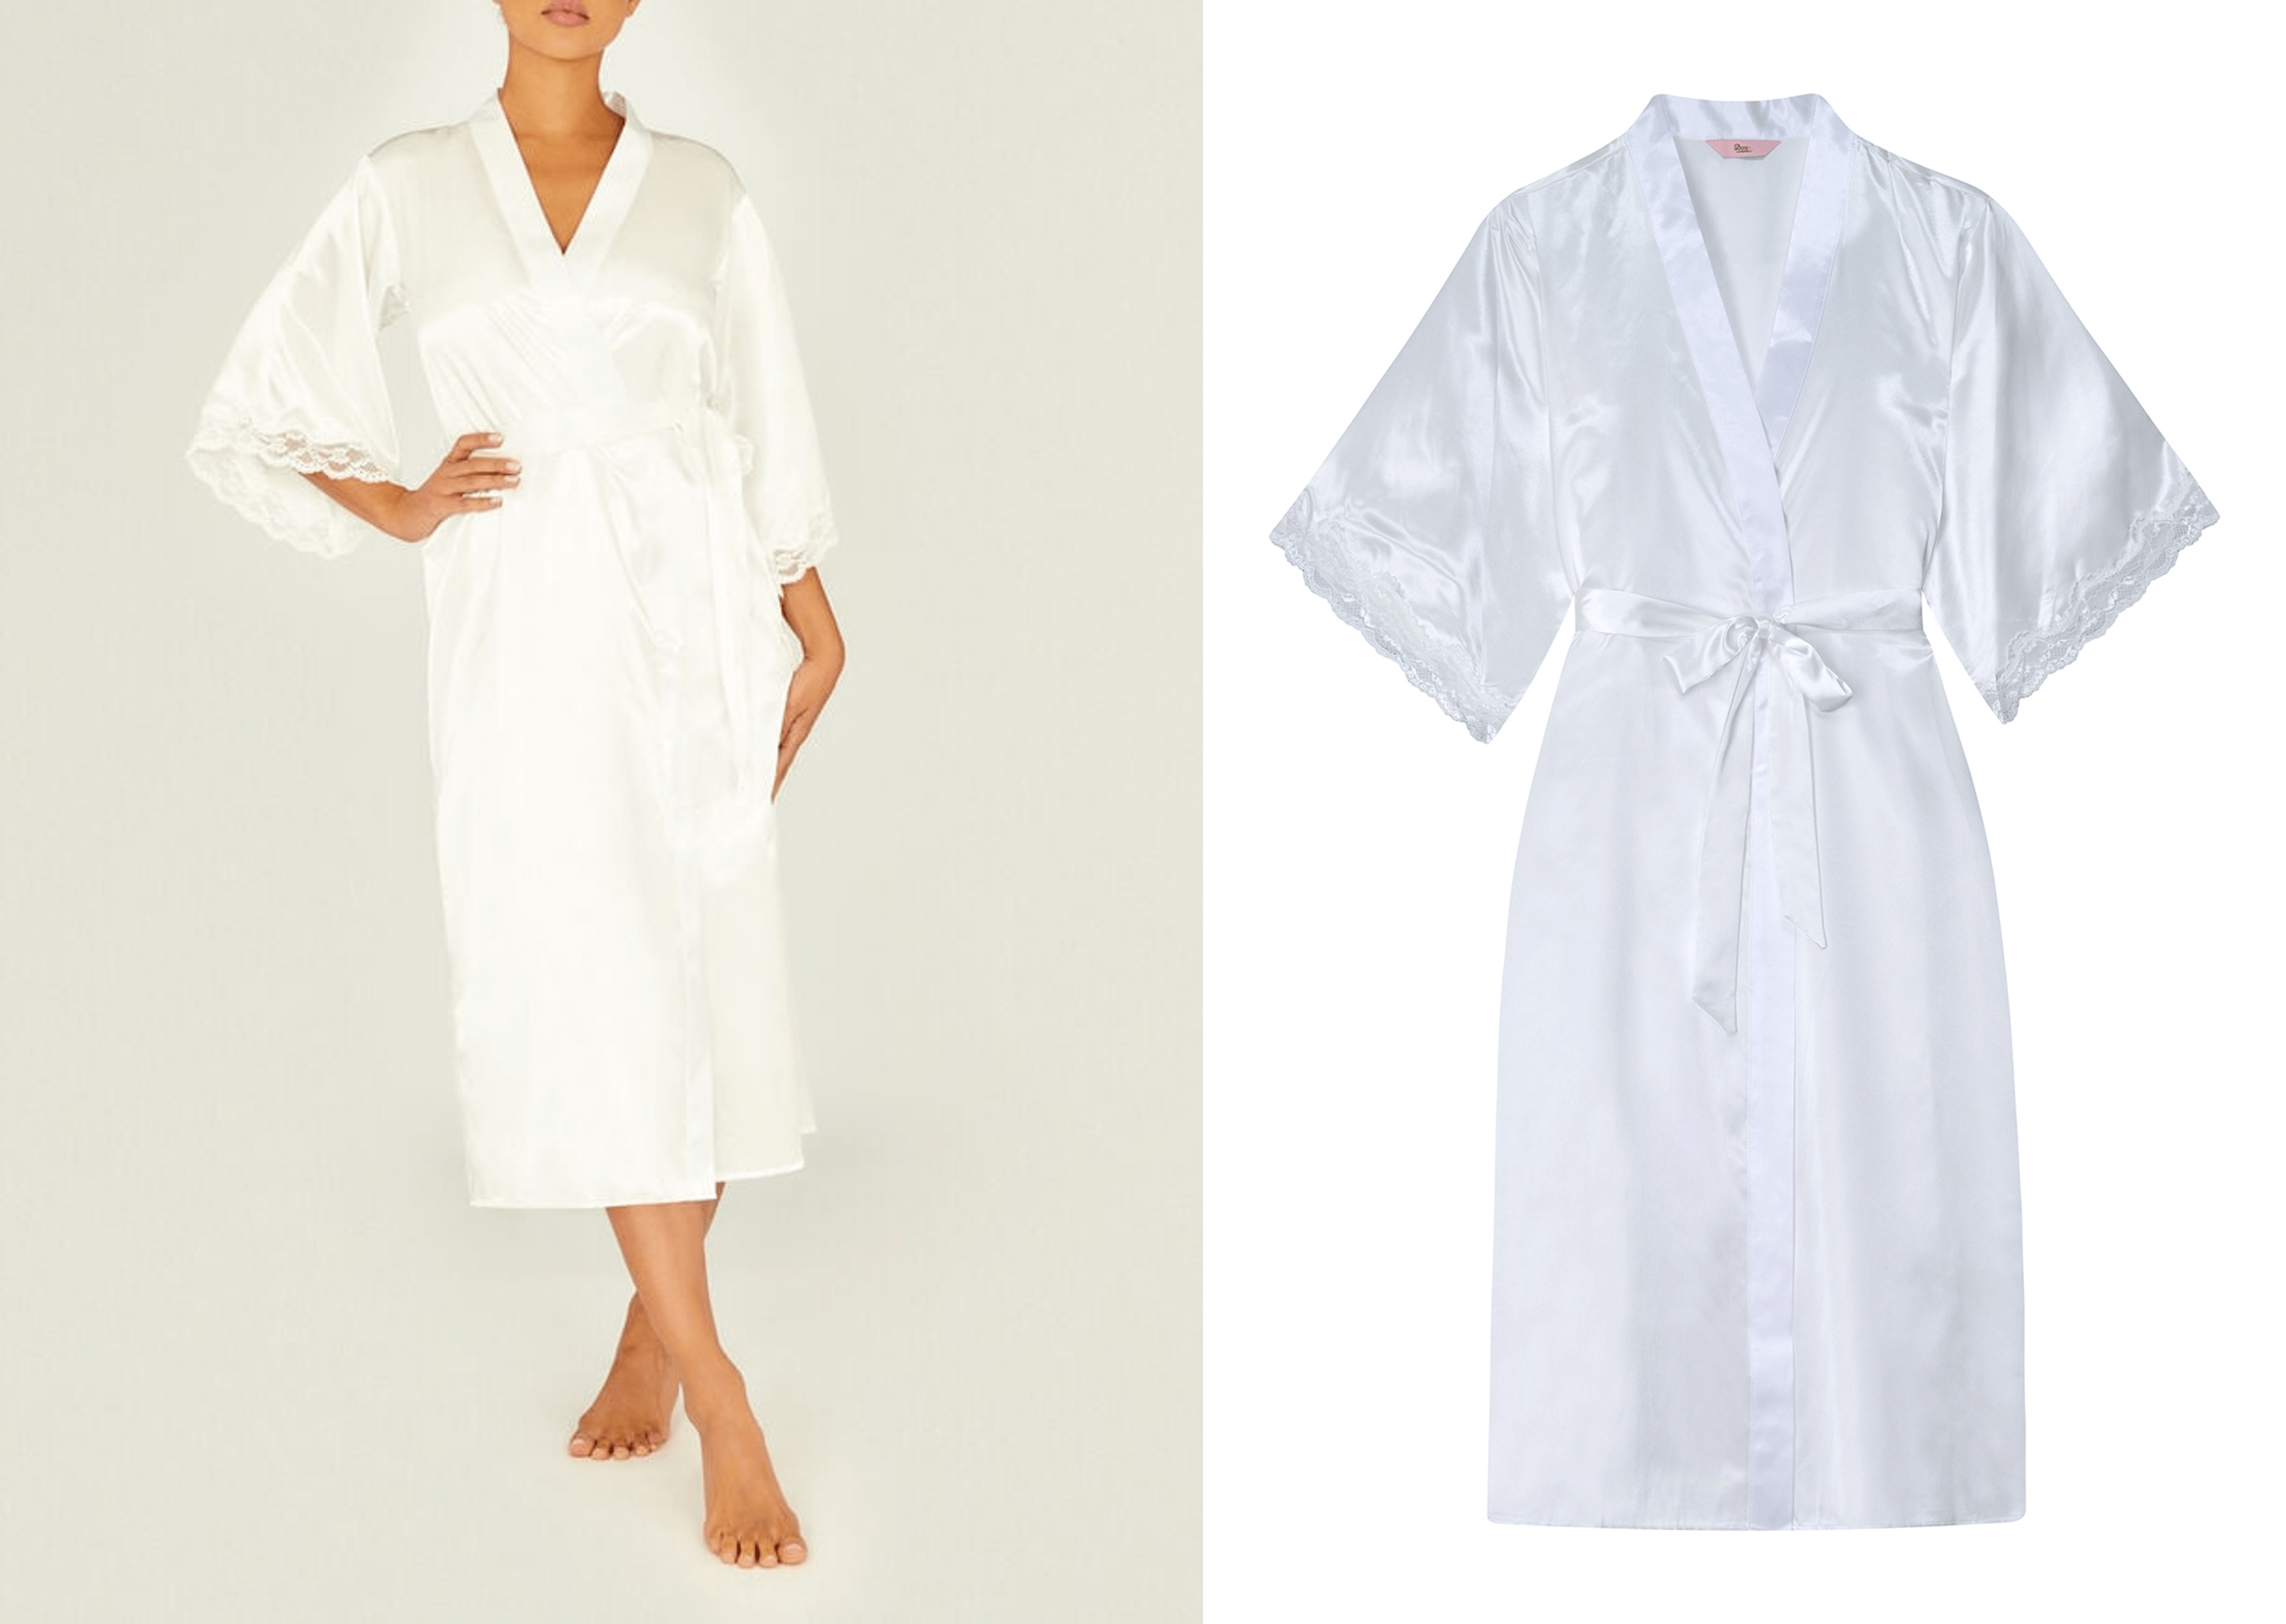 Girl Womens Kimono Robes Satin Dressing Gown,Women's Negligee Sexy Strappy  Nightdress,Sleepwear Long Camisole Pajamas Robe Lace Trim Bathrobe,V-neck  Sexy Short Nightgown,2 Styles : Buy Online at Best Price in KSA - Souq